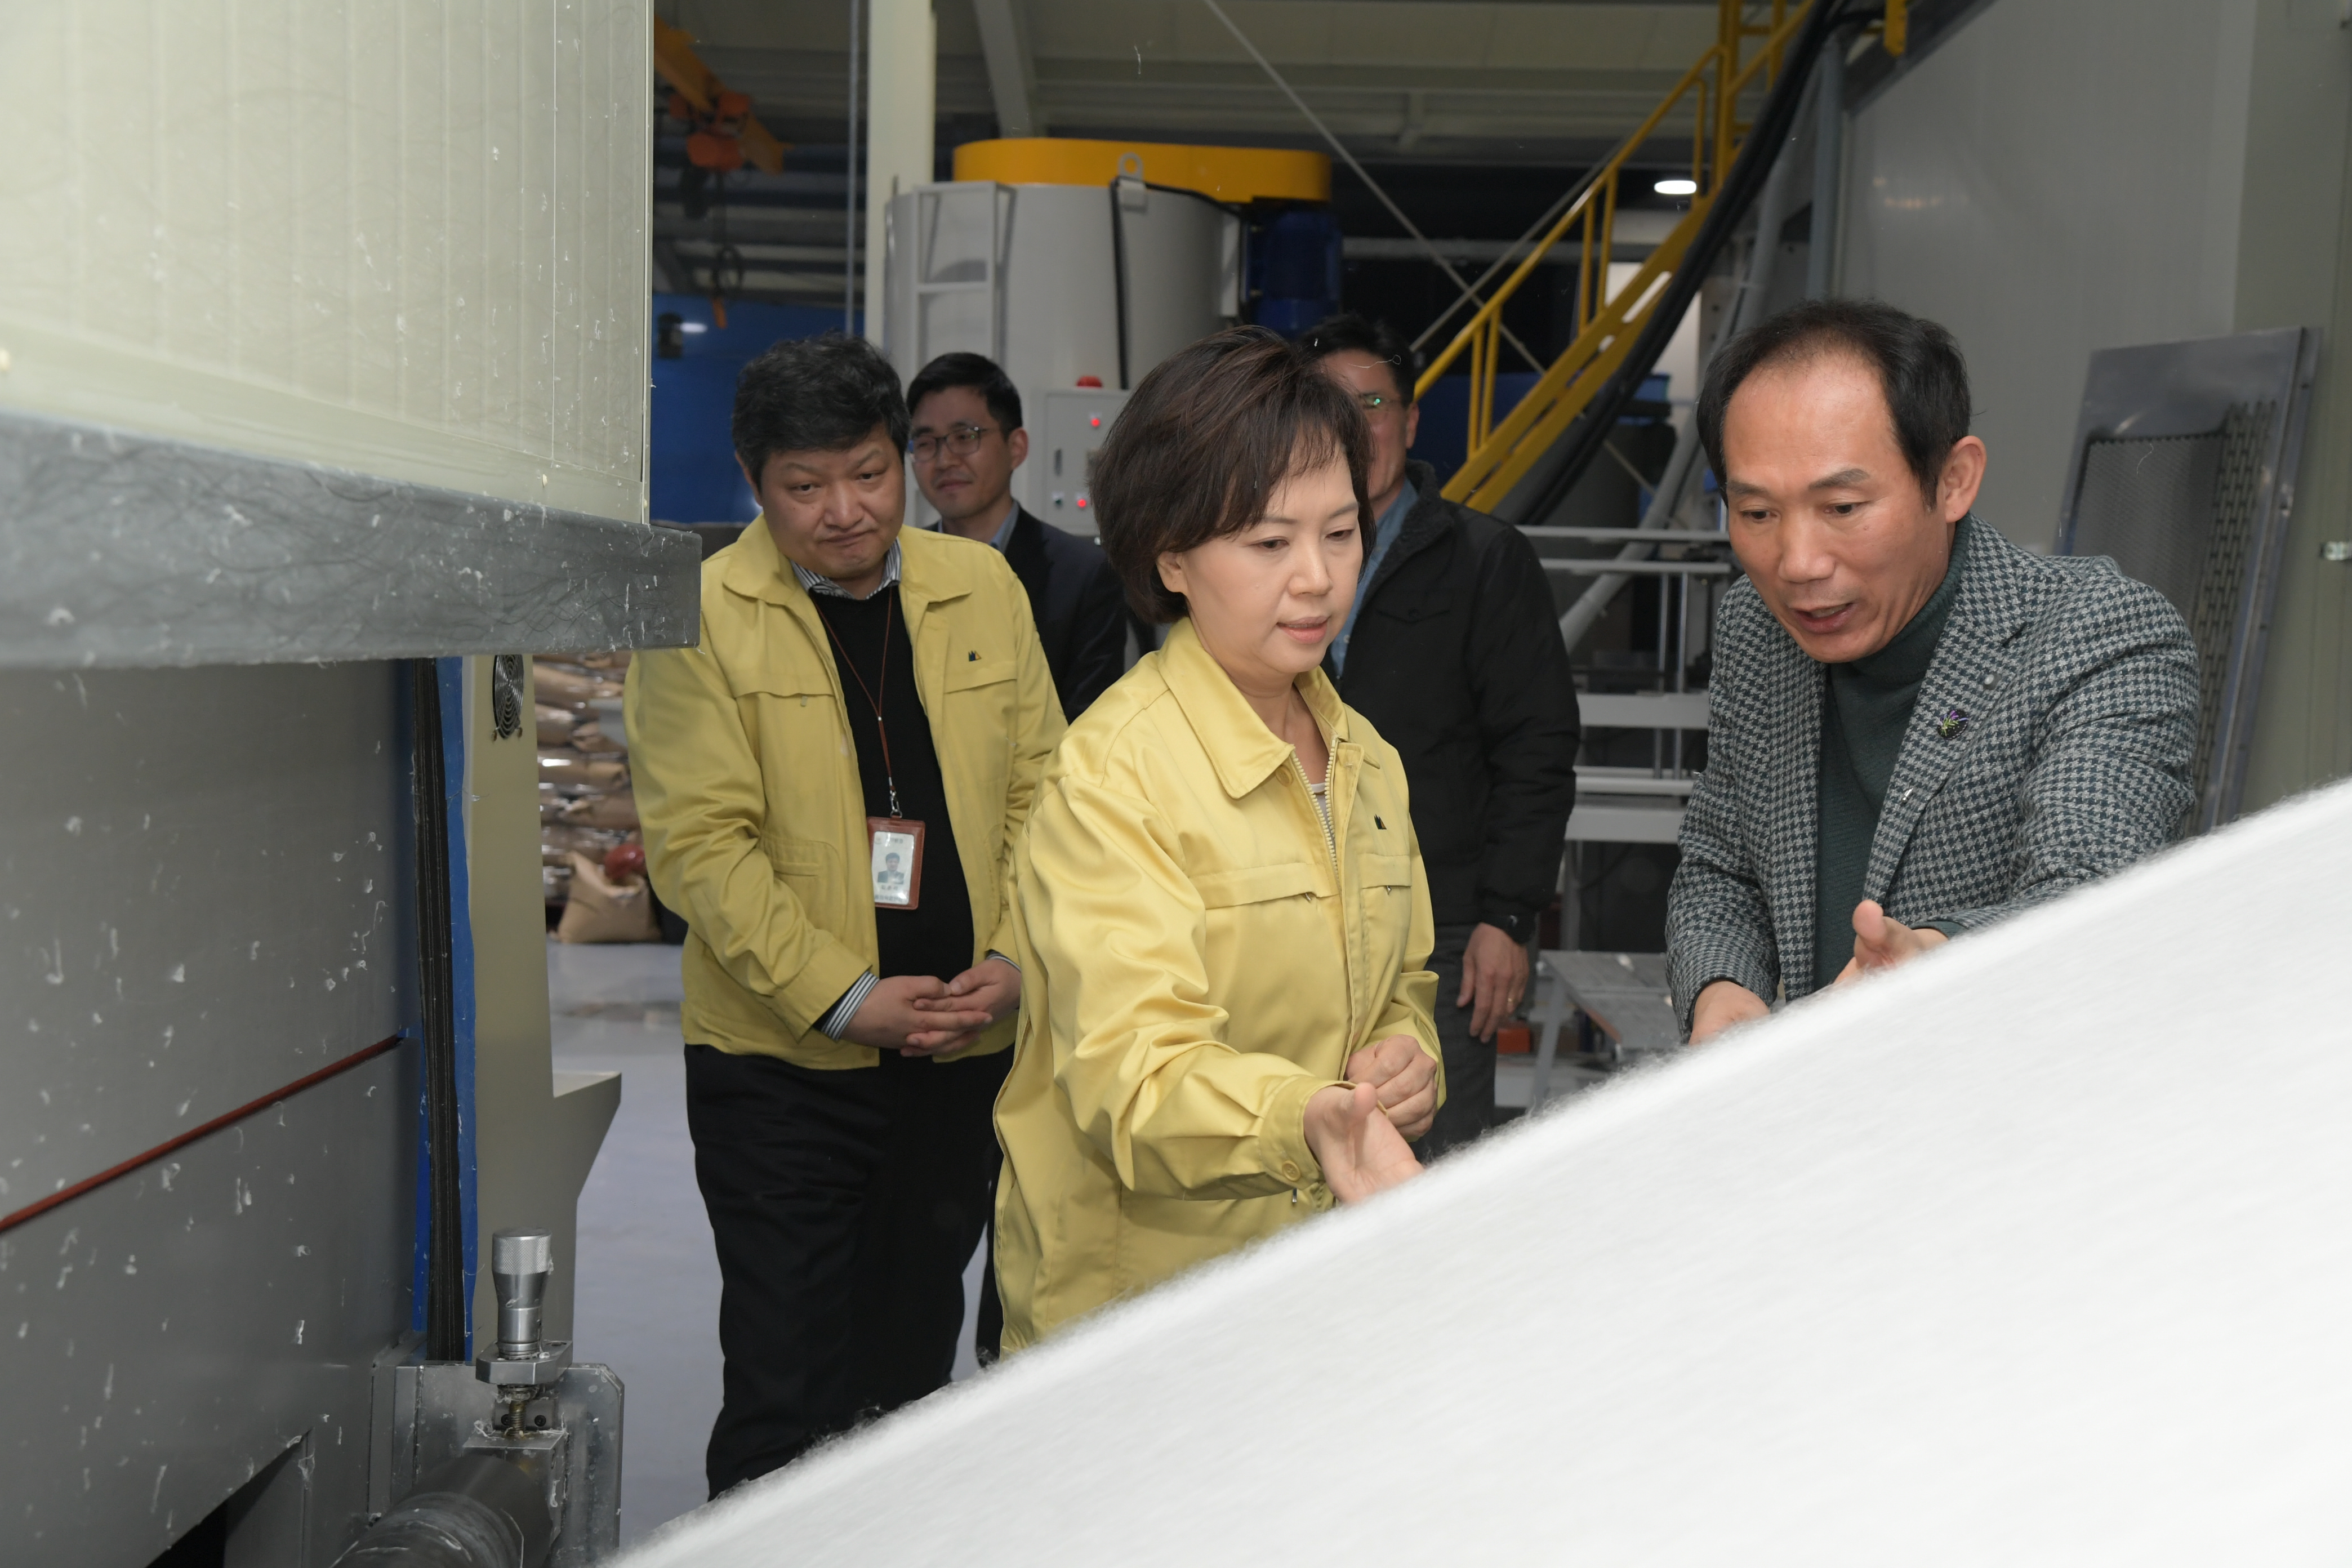 Photo News3 - [Mar. 24, 2020] Minister inspects mask-filter manufacturing site